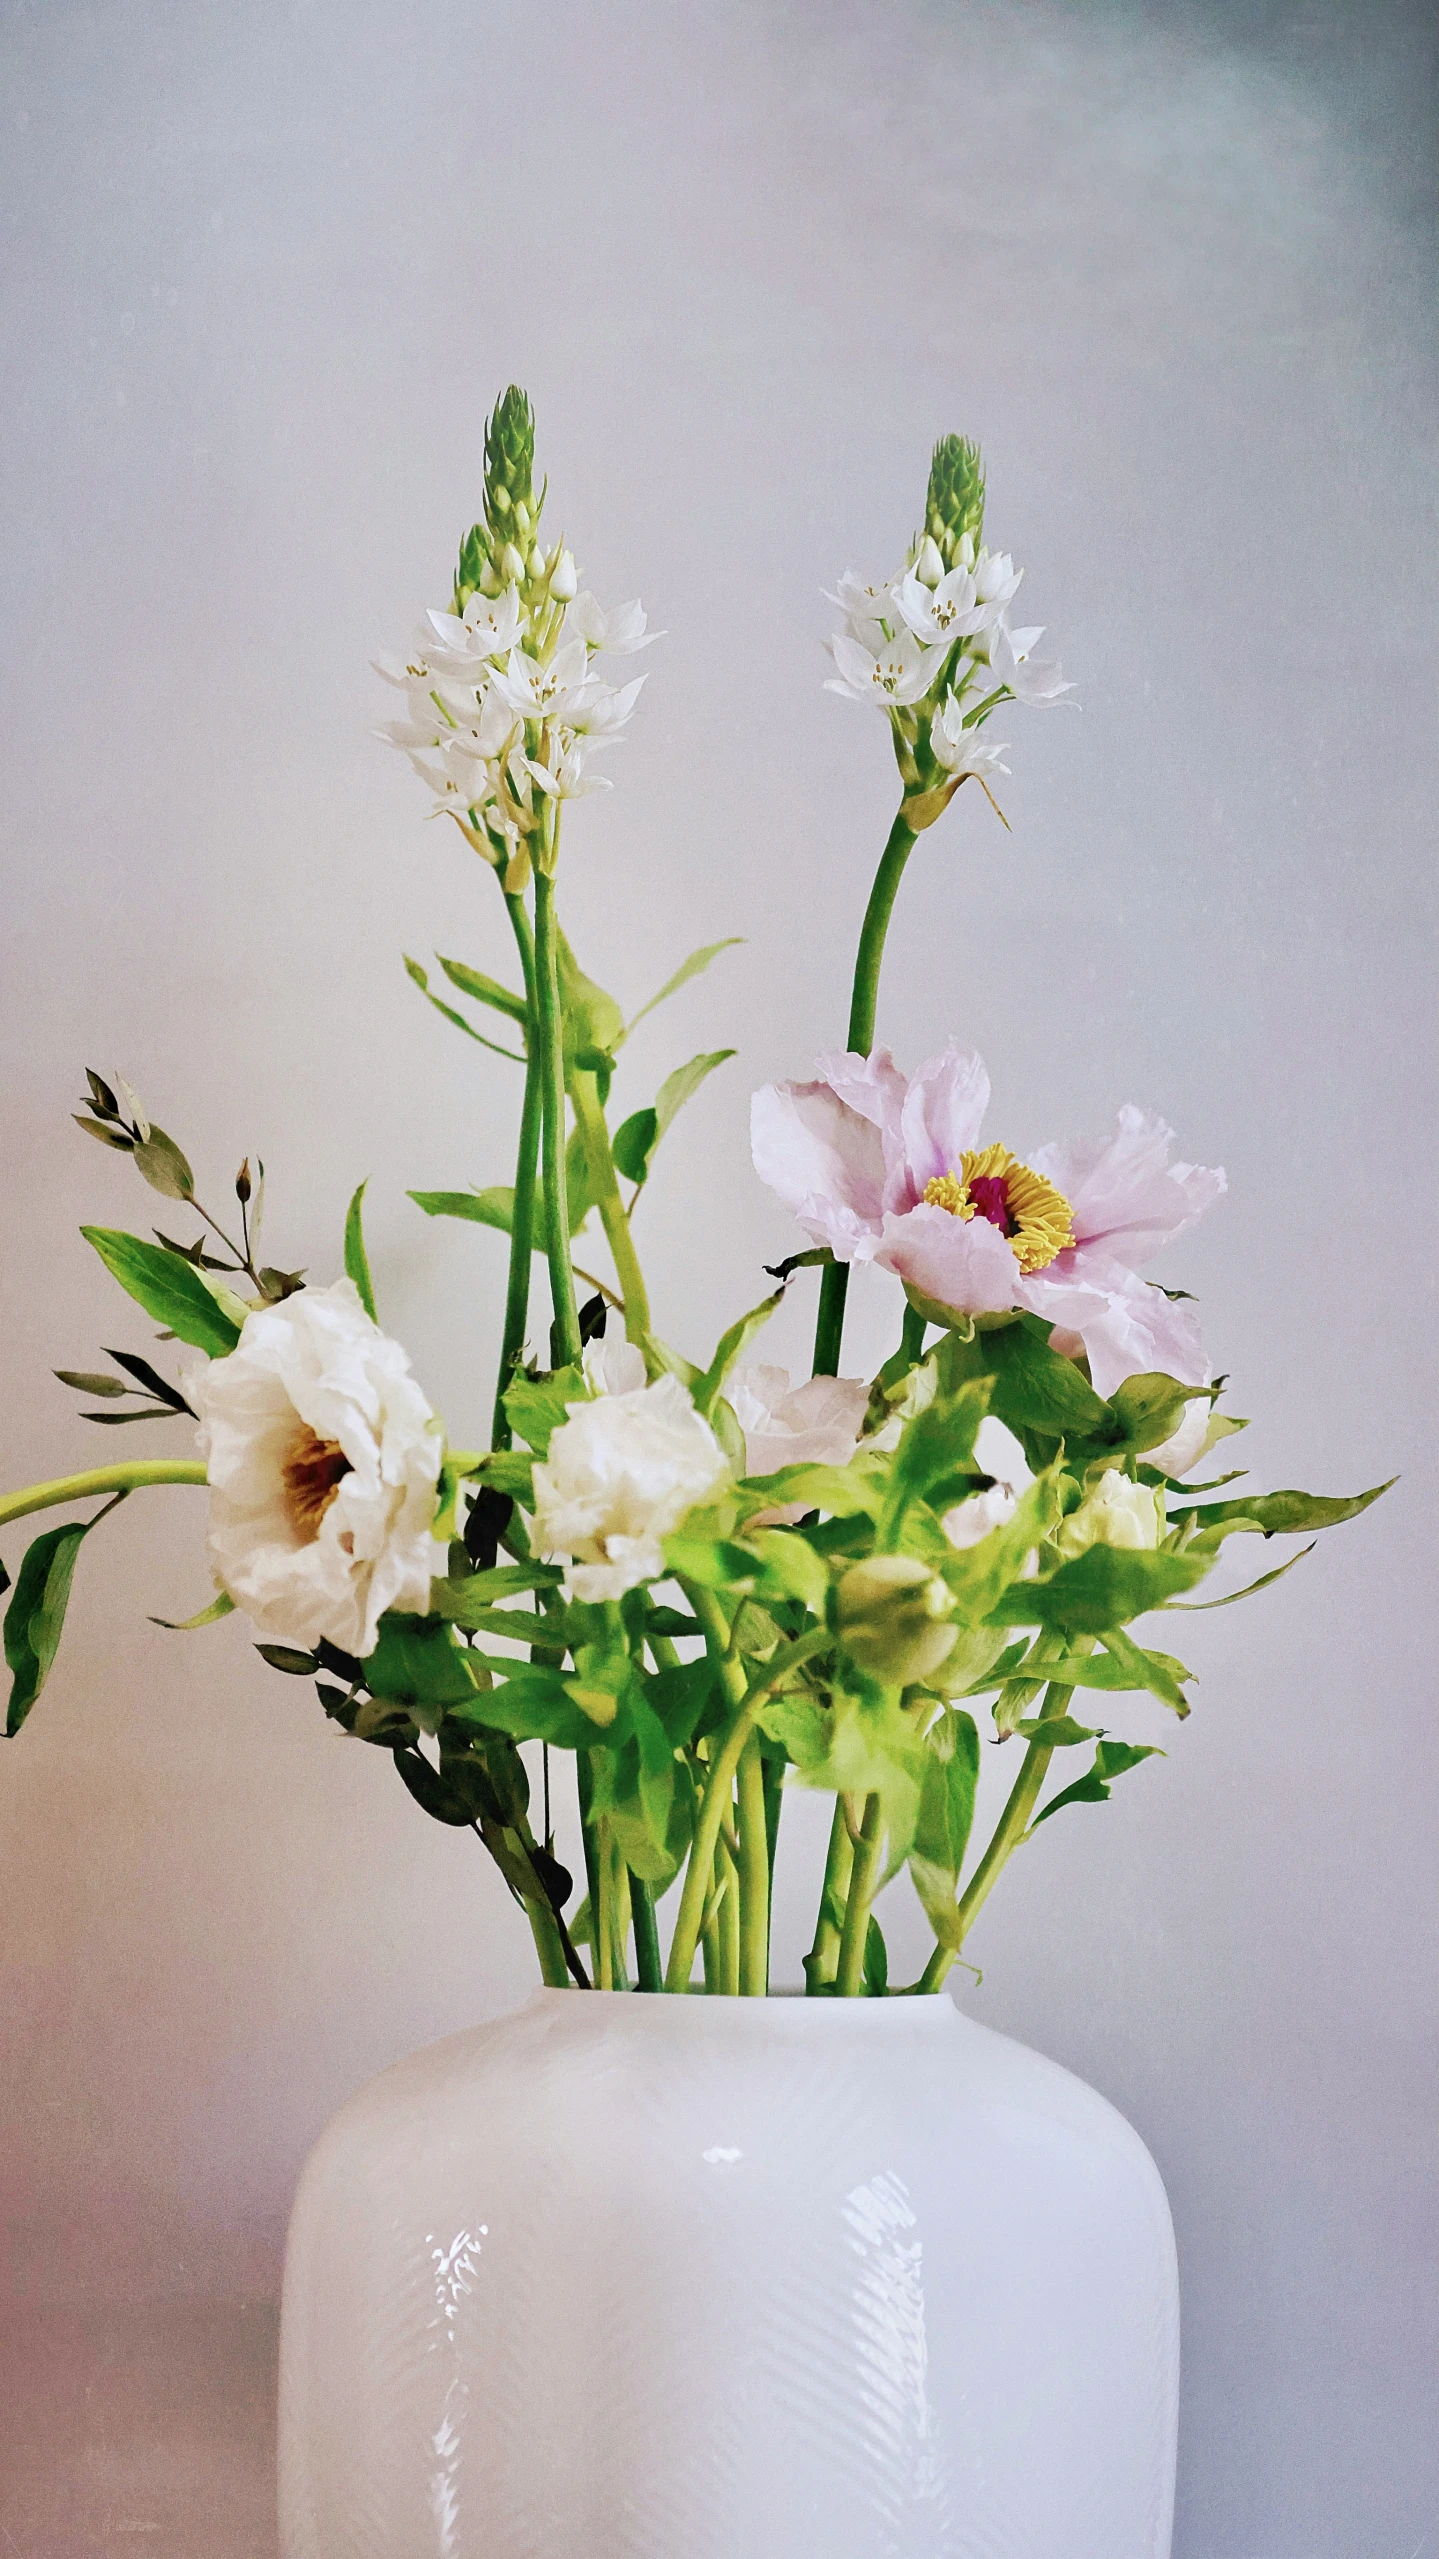 there are many flowers in the white vase